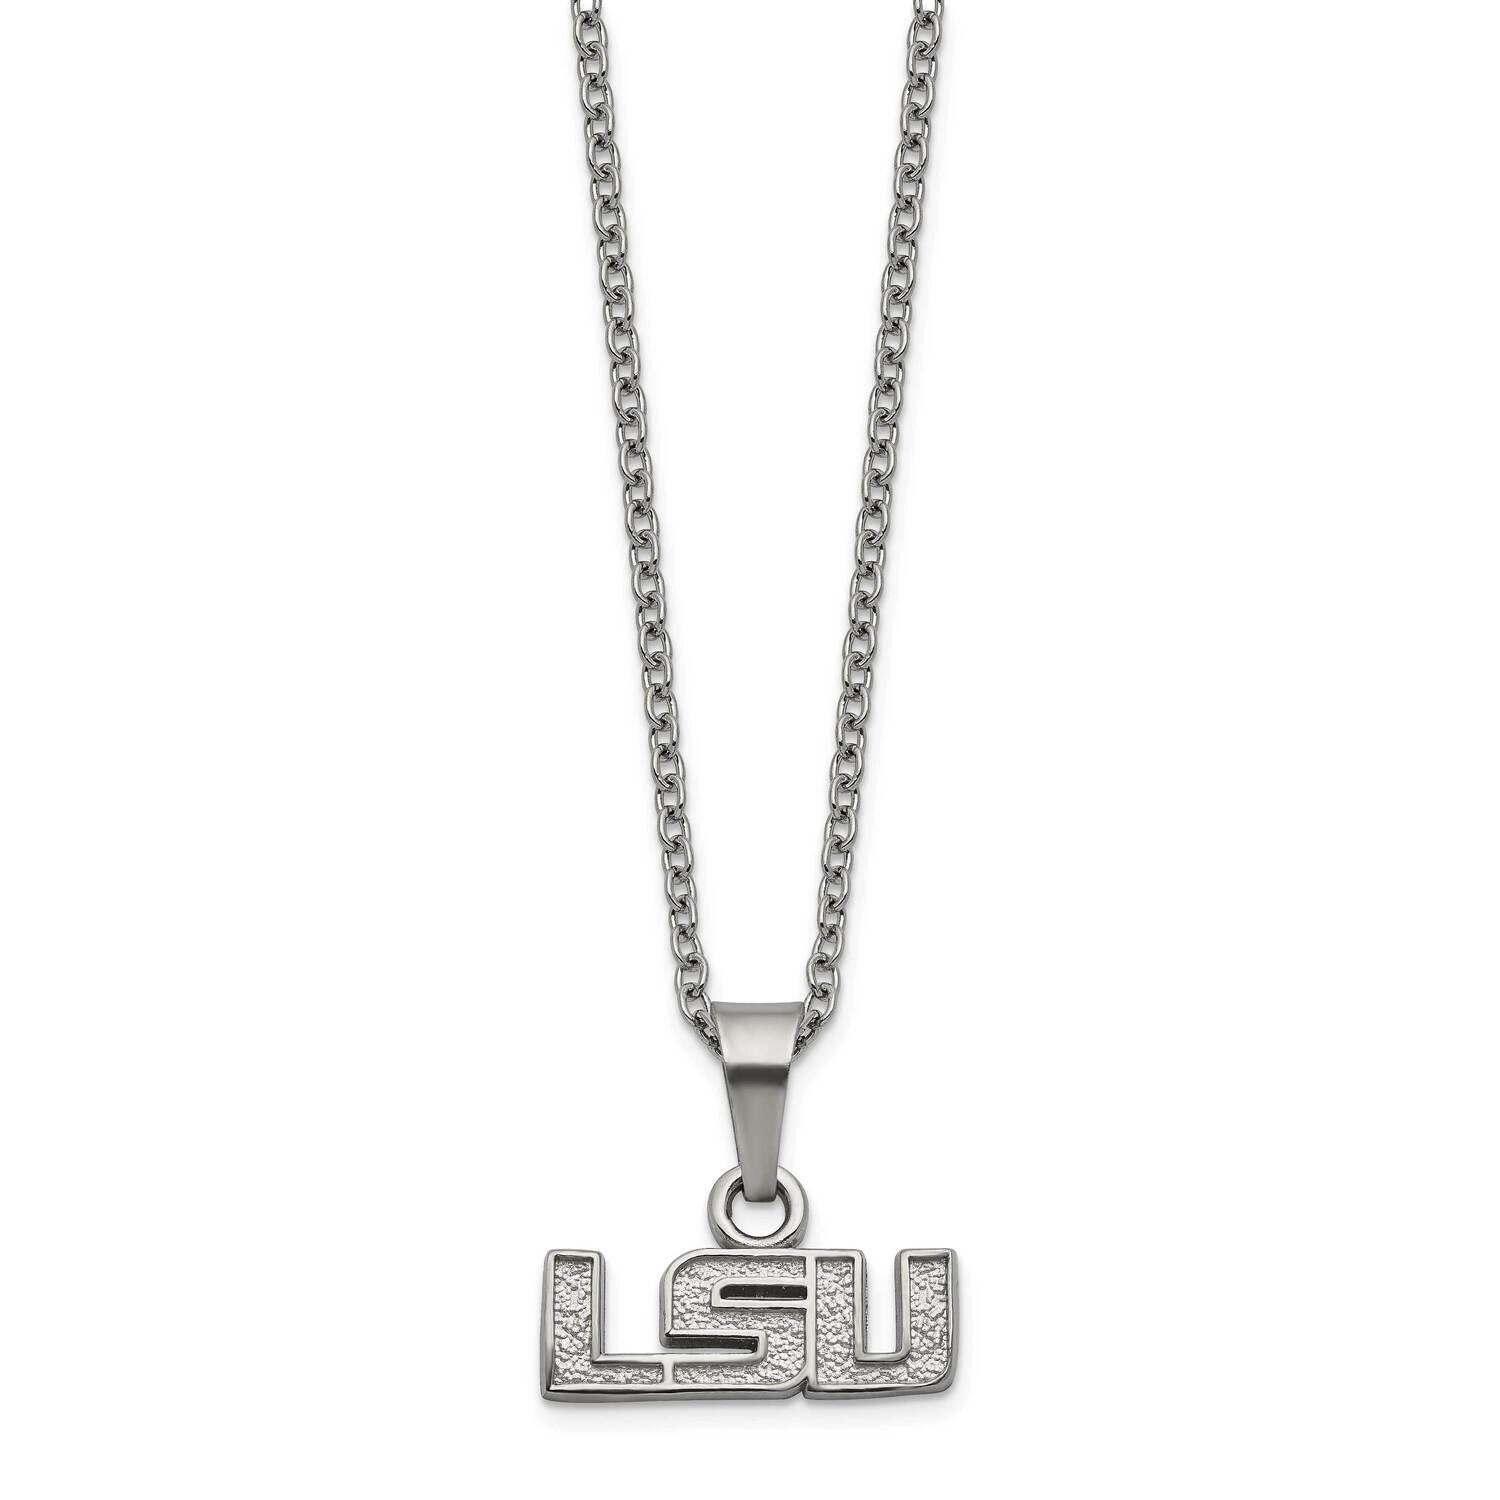 Lsu Pendant &amp; Chain with 2 inch Extender Necklace Stainless Steel ST516LSU